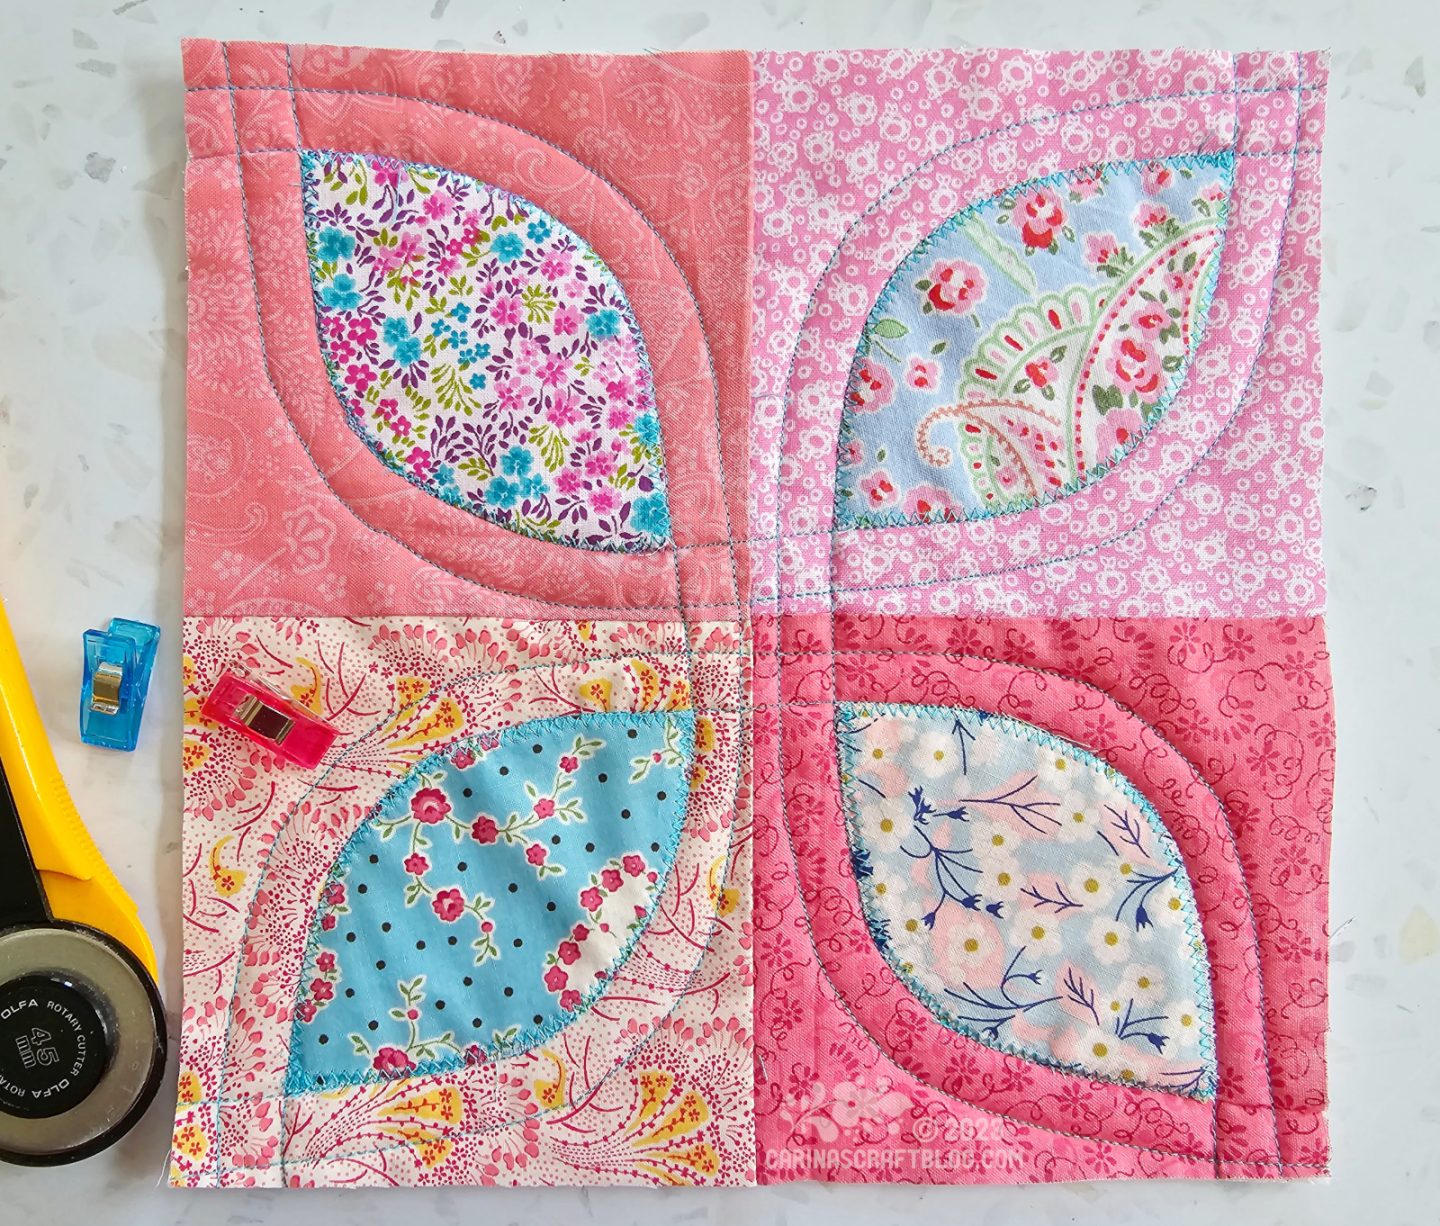 A small square quilt made of four different squares of pink with a blue leaf shape appliquéd in each square.